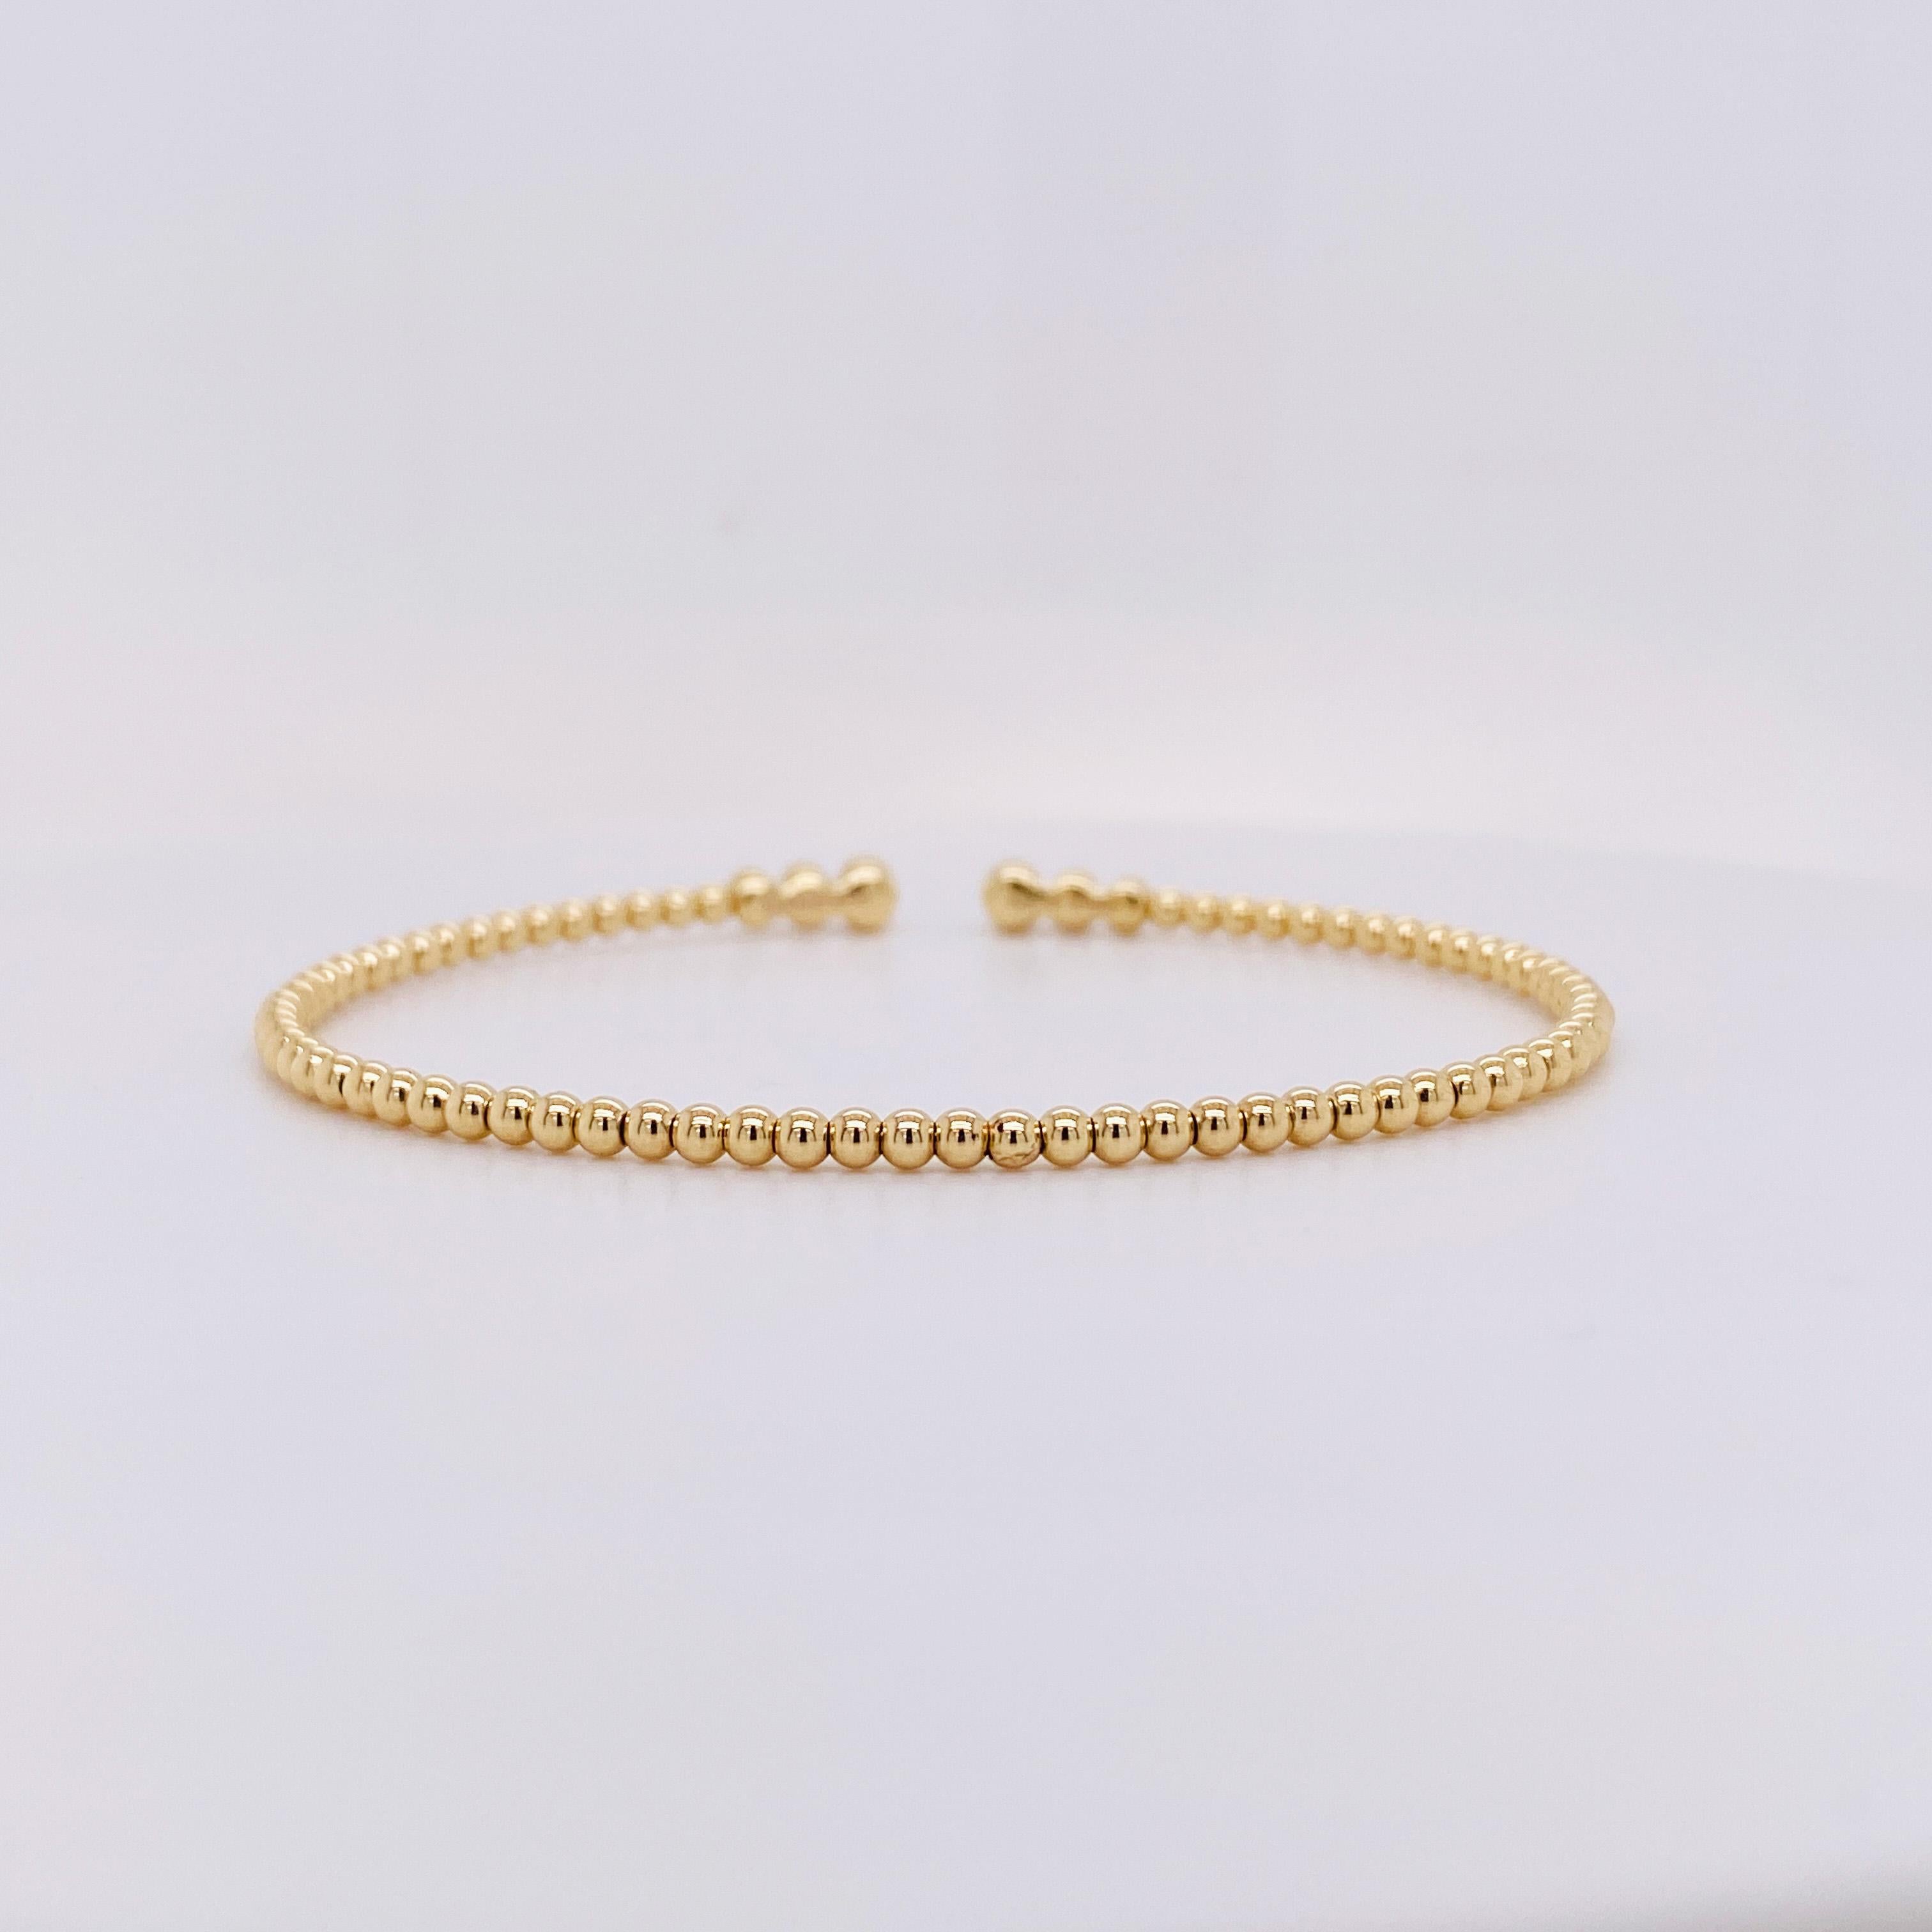 FUN! COLLECTIBLE! DESIGNER! DIAMOND FASHION BANGLE BRACELET! 

This fun designer diamond bangle bracelet is so adorable and looks great on everyone! With three round diamonds set in a modern bezel setting on each side this bracelet has just the